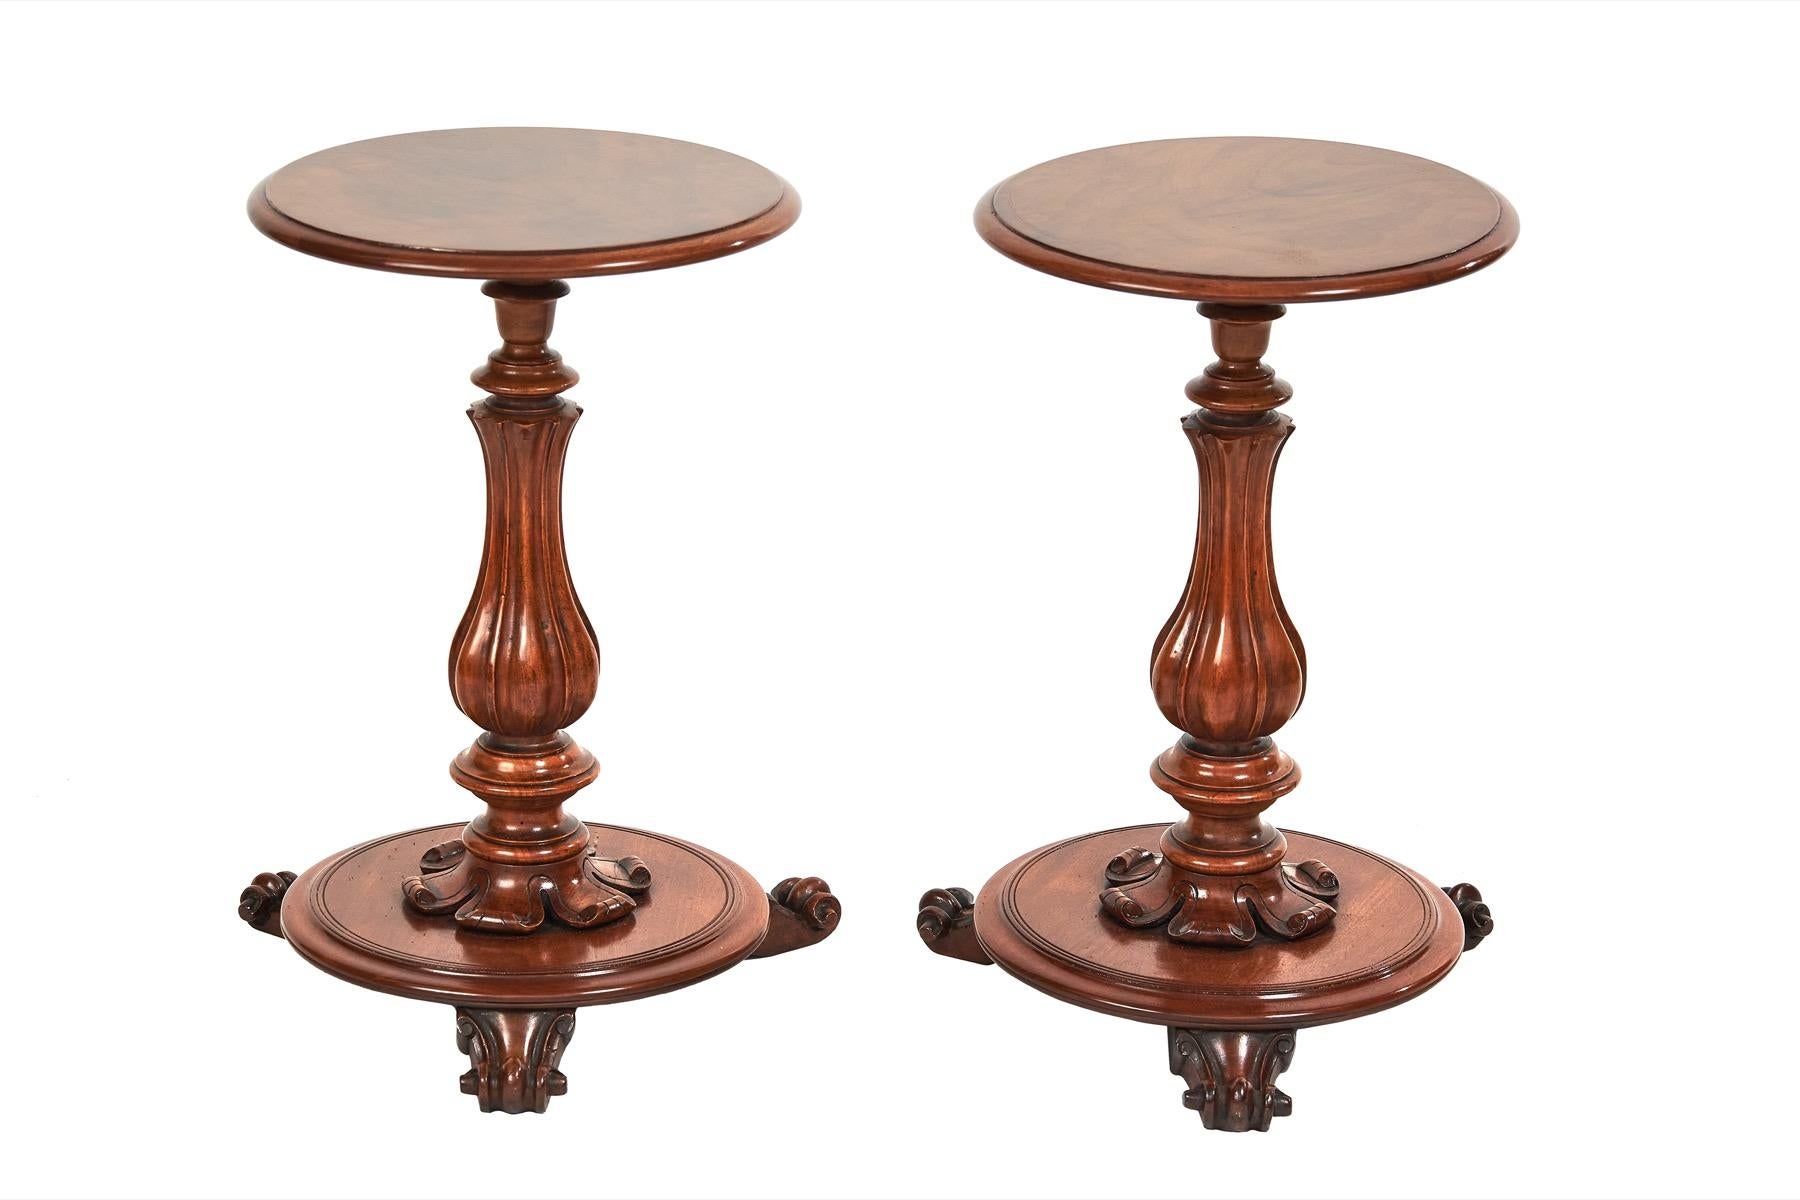 Pair Victorian walnut & carved lamp tables,
 Figured Walnut Circular tops with thumb mould edge,35cm diameter
Turned & Carved Pedestal, 
Carved Petal Decoration at base, 
Circular Platform Base, 
with 3 carved scroll feet
Recently Polished.